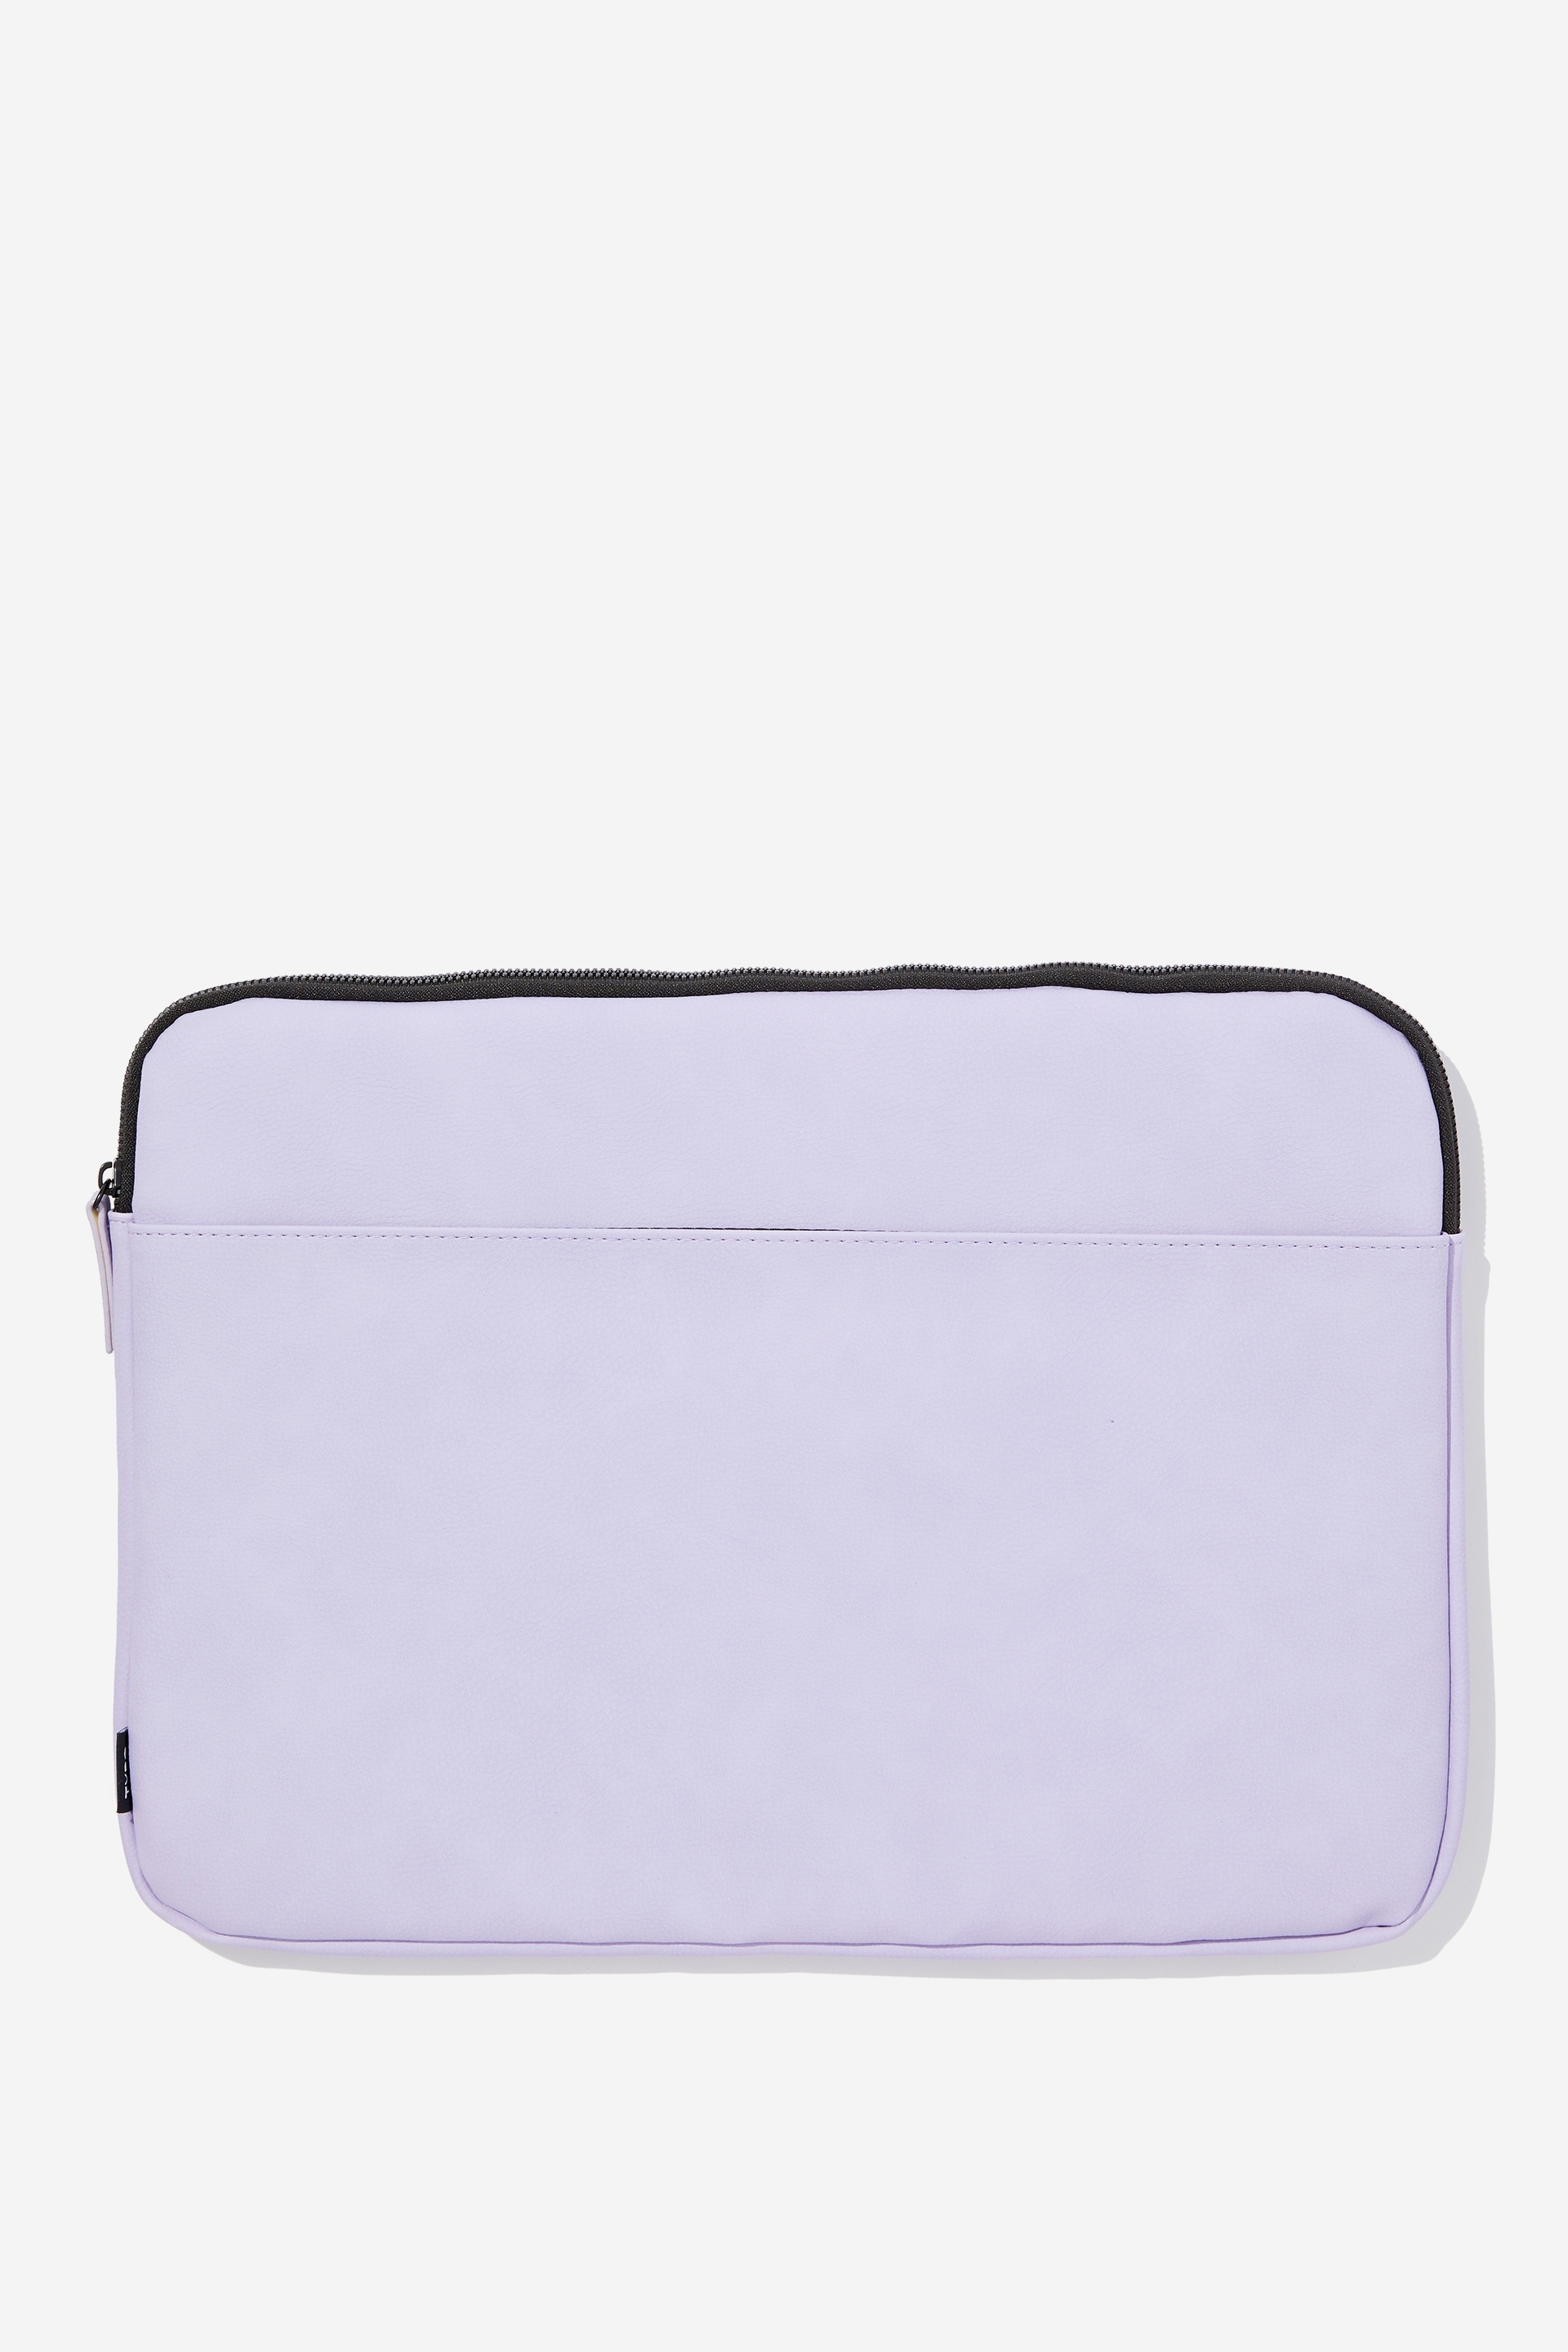 Typo - Core Laptop Cover 15 Inch - Soft lilac